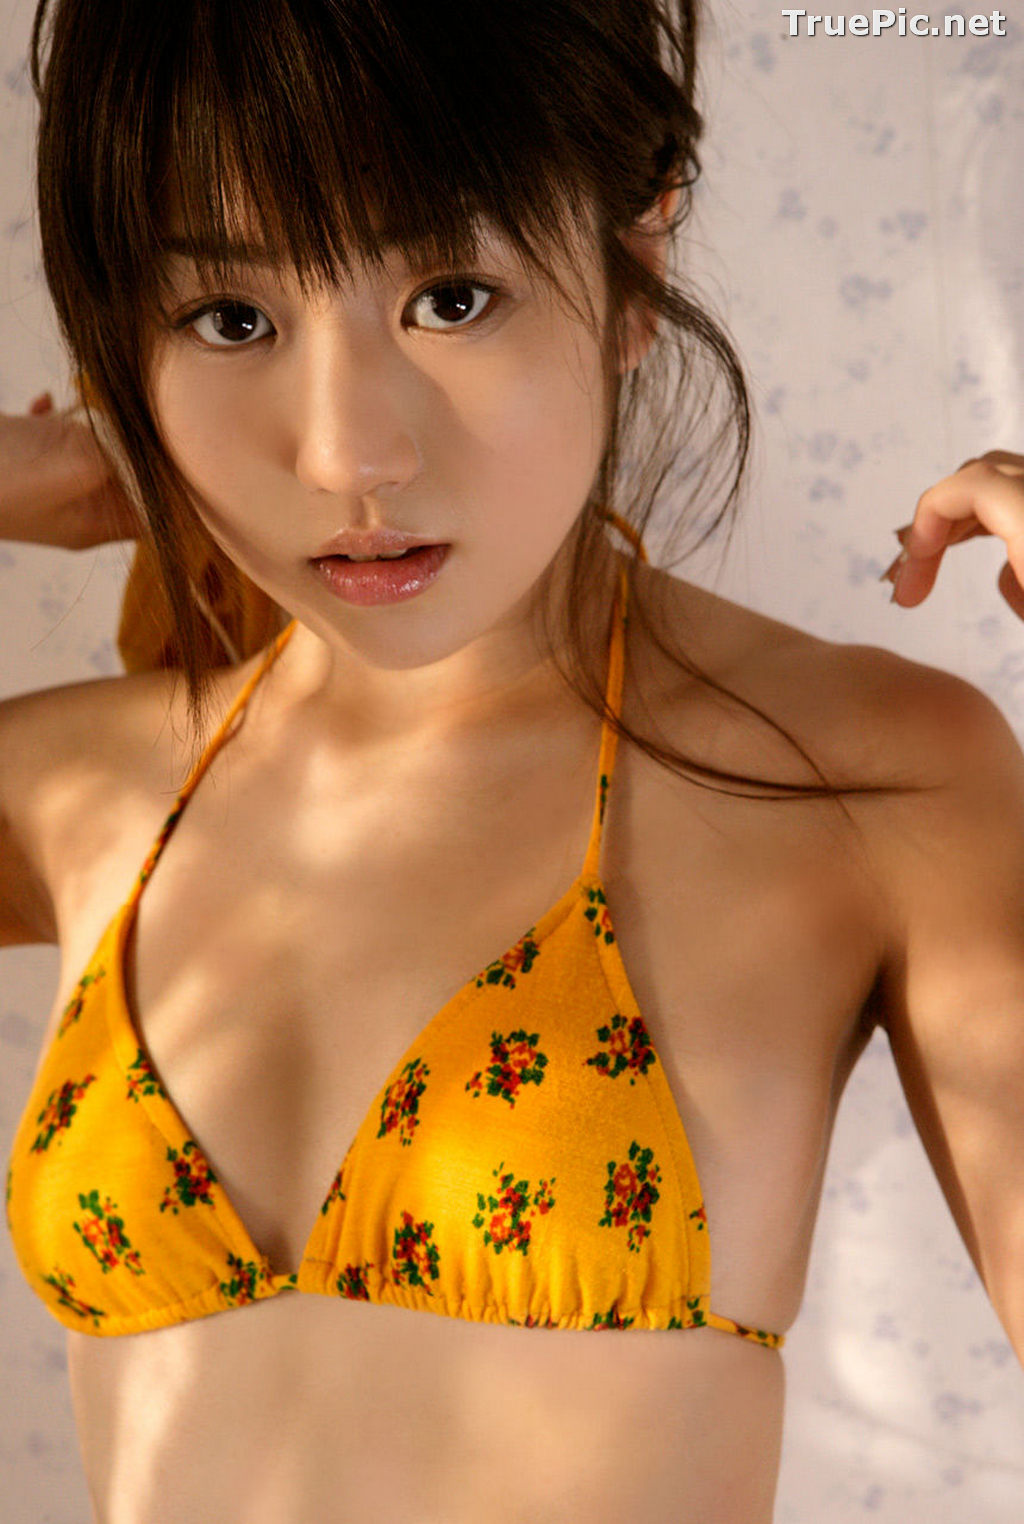 Image Japanese Actress and Gravure Idol - Chise Nakamura - Heroines Rest - TruePic.net - Picture-21